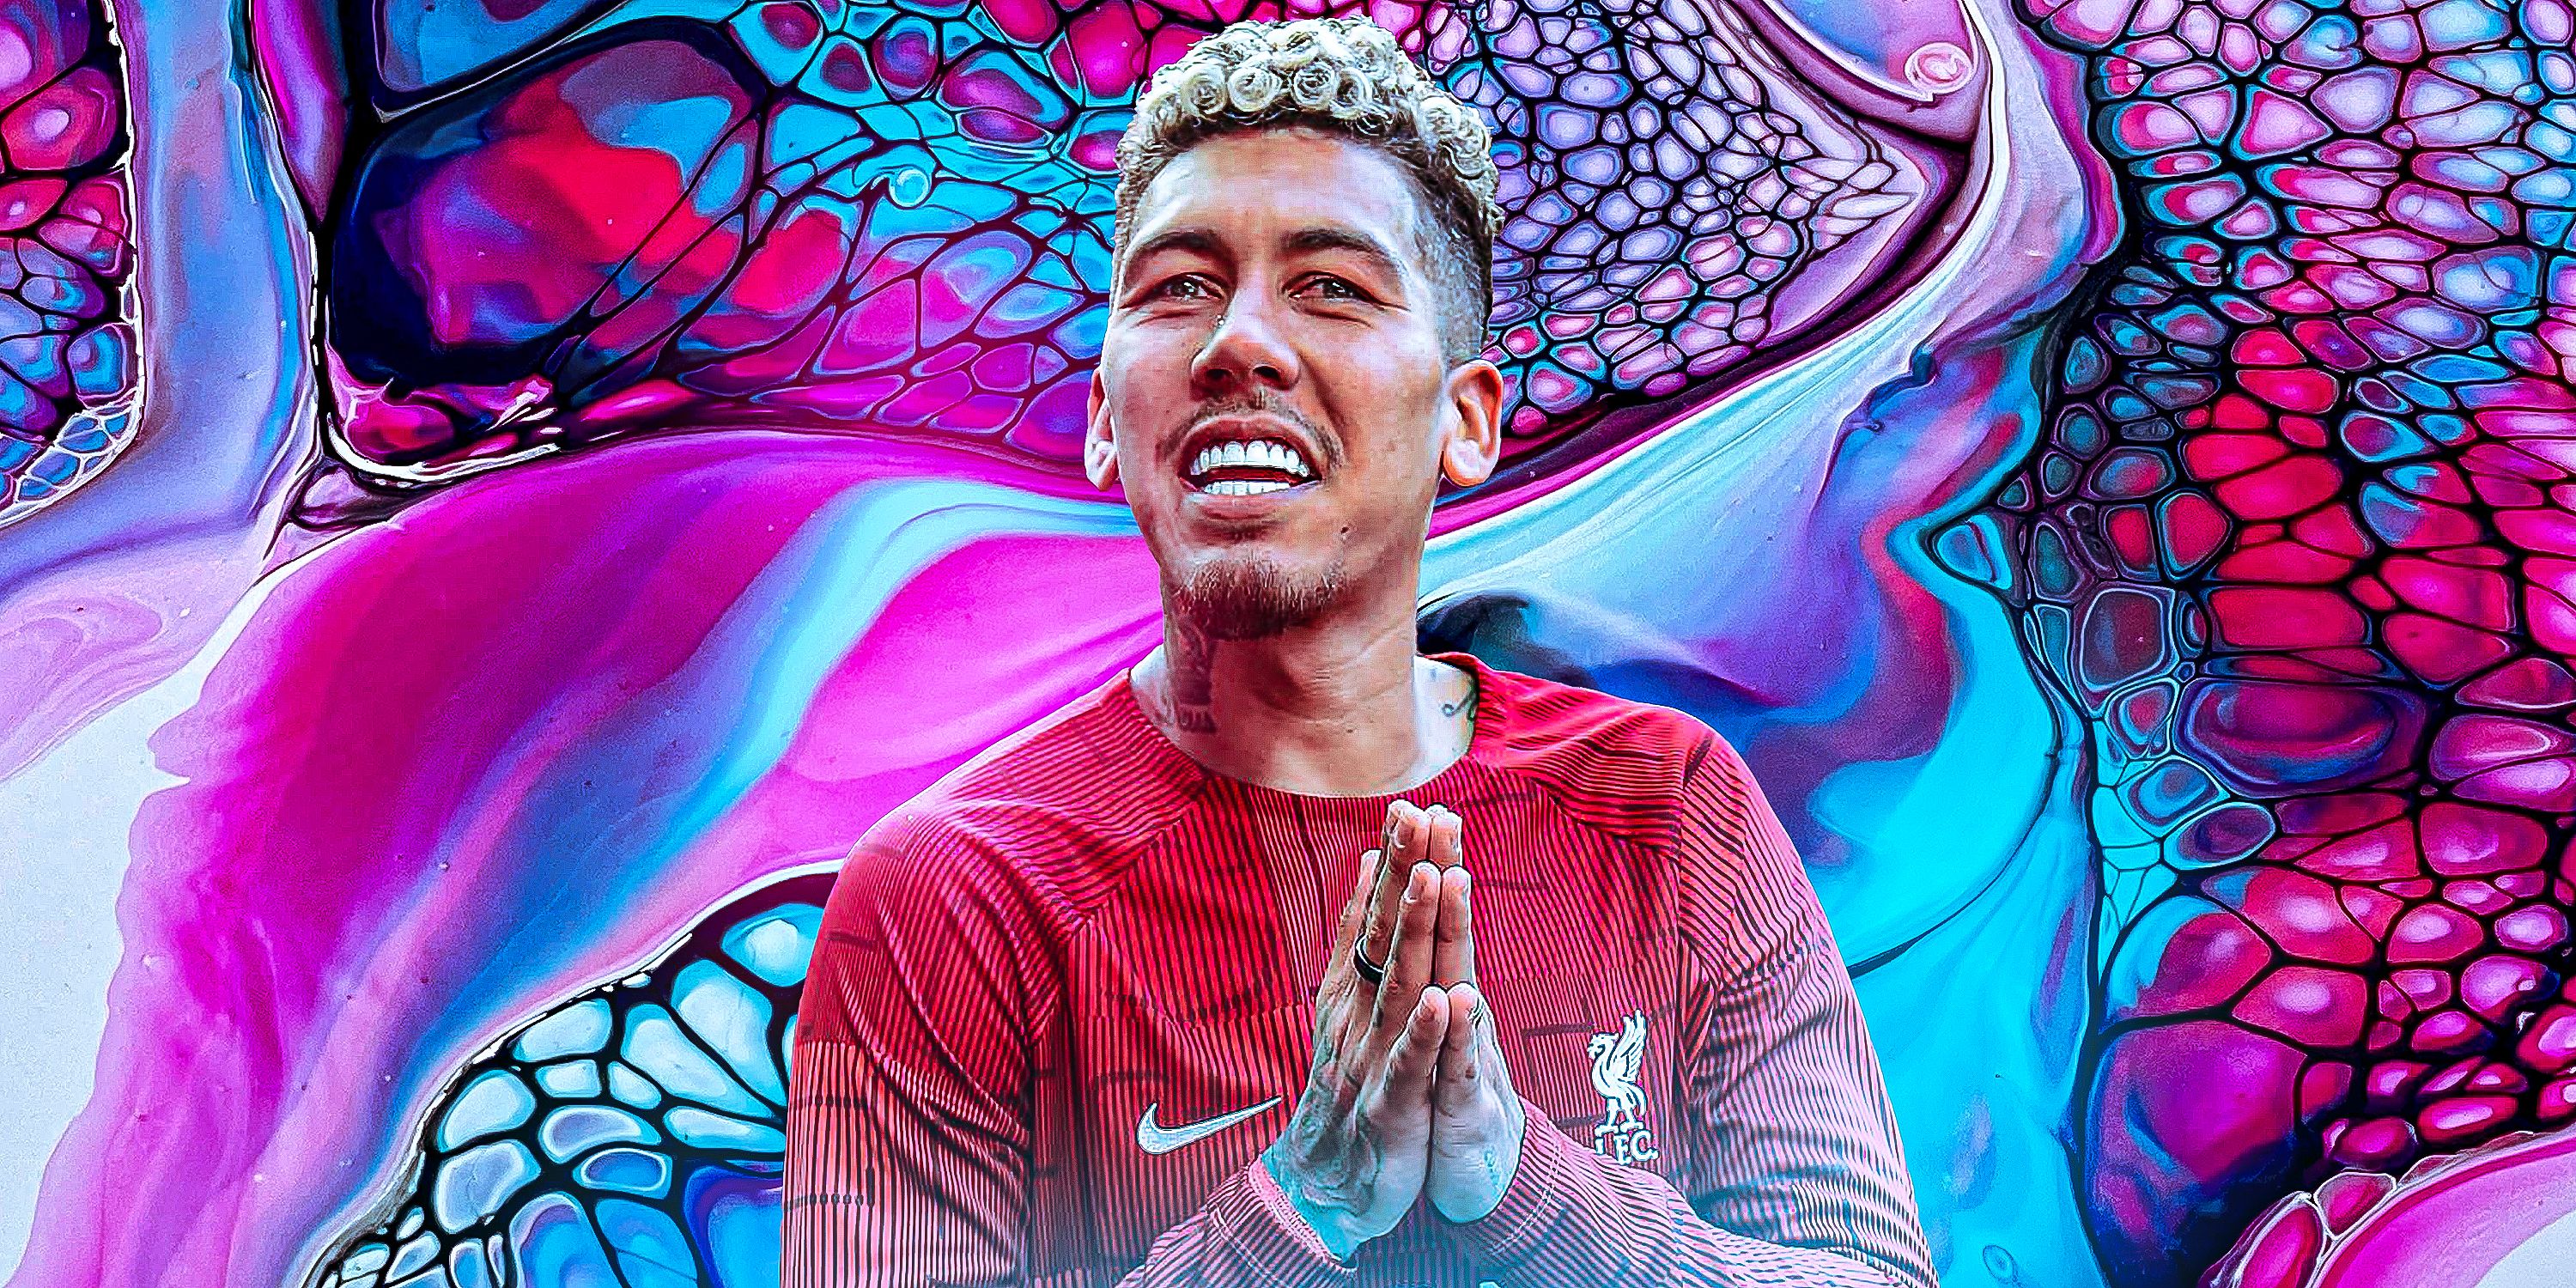 Roberto Firmino Gave 200 Farewell Gift Boxes to Liverpool Staff & Teammates